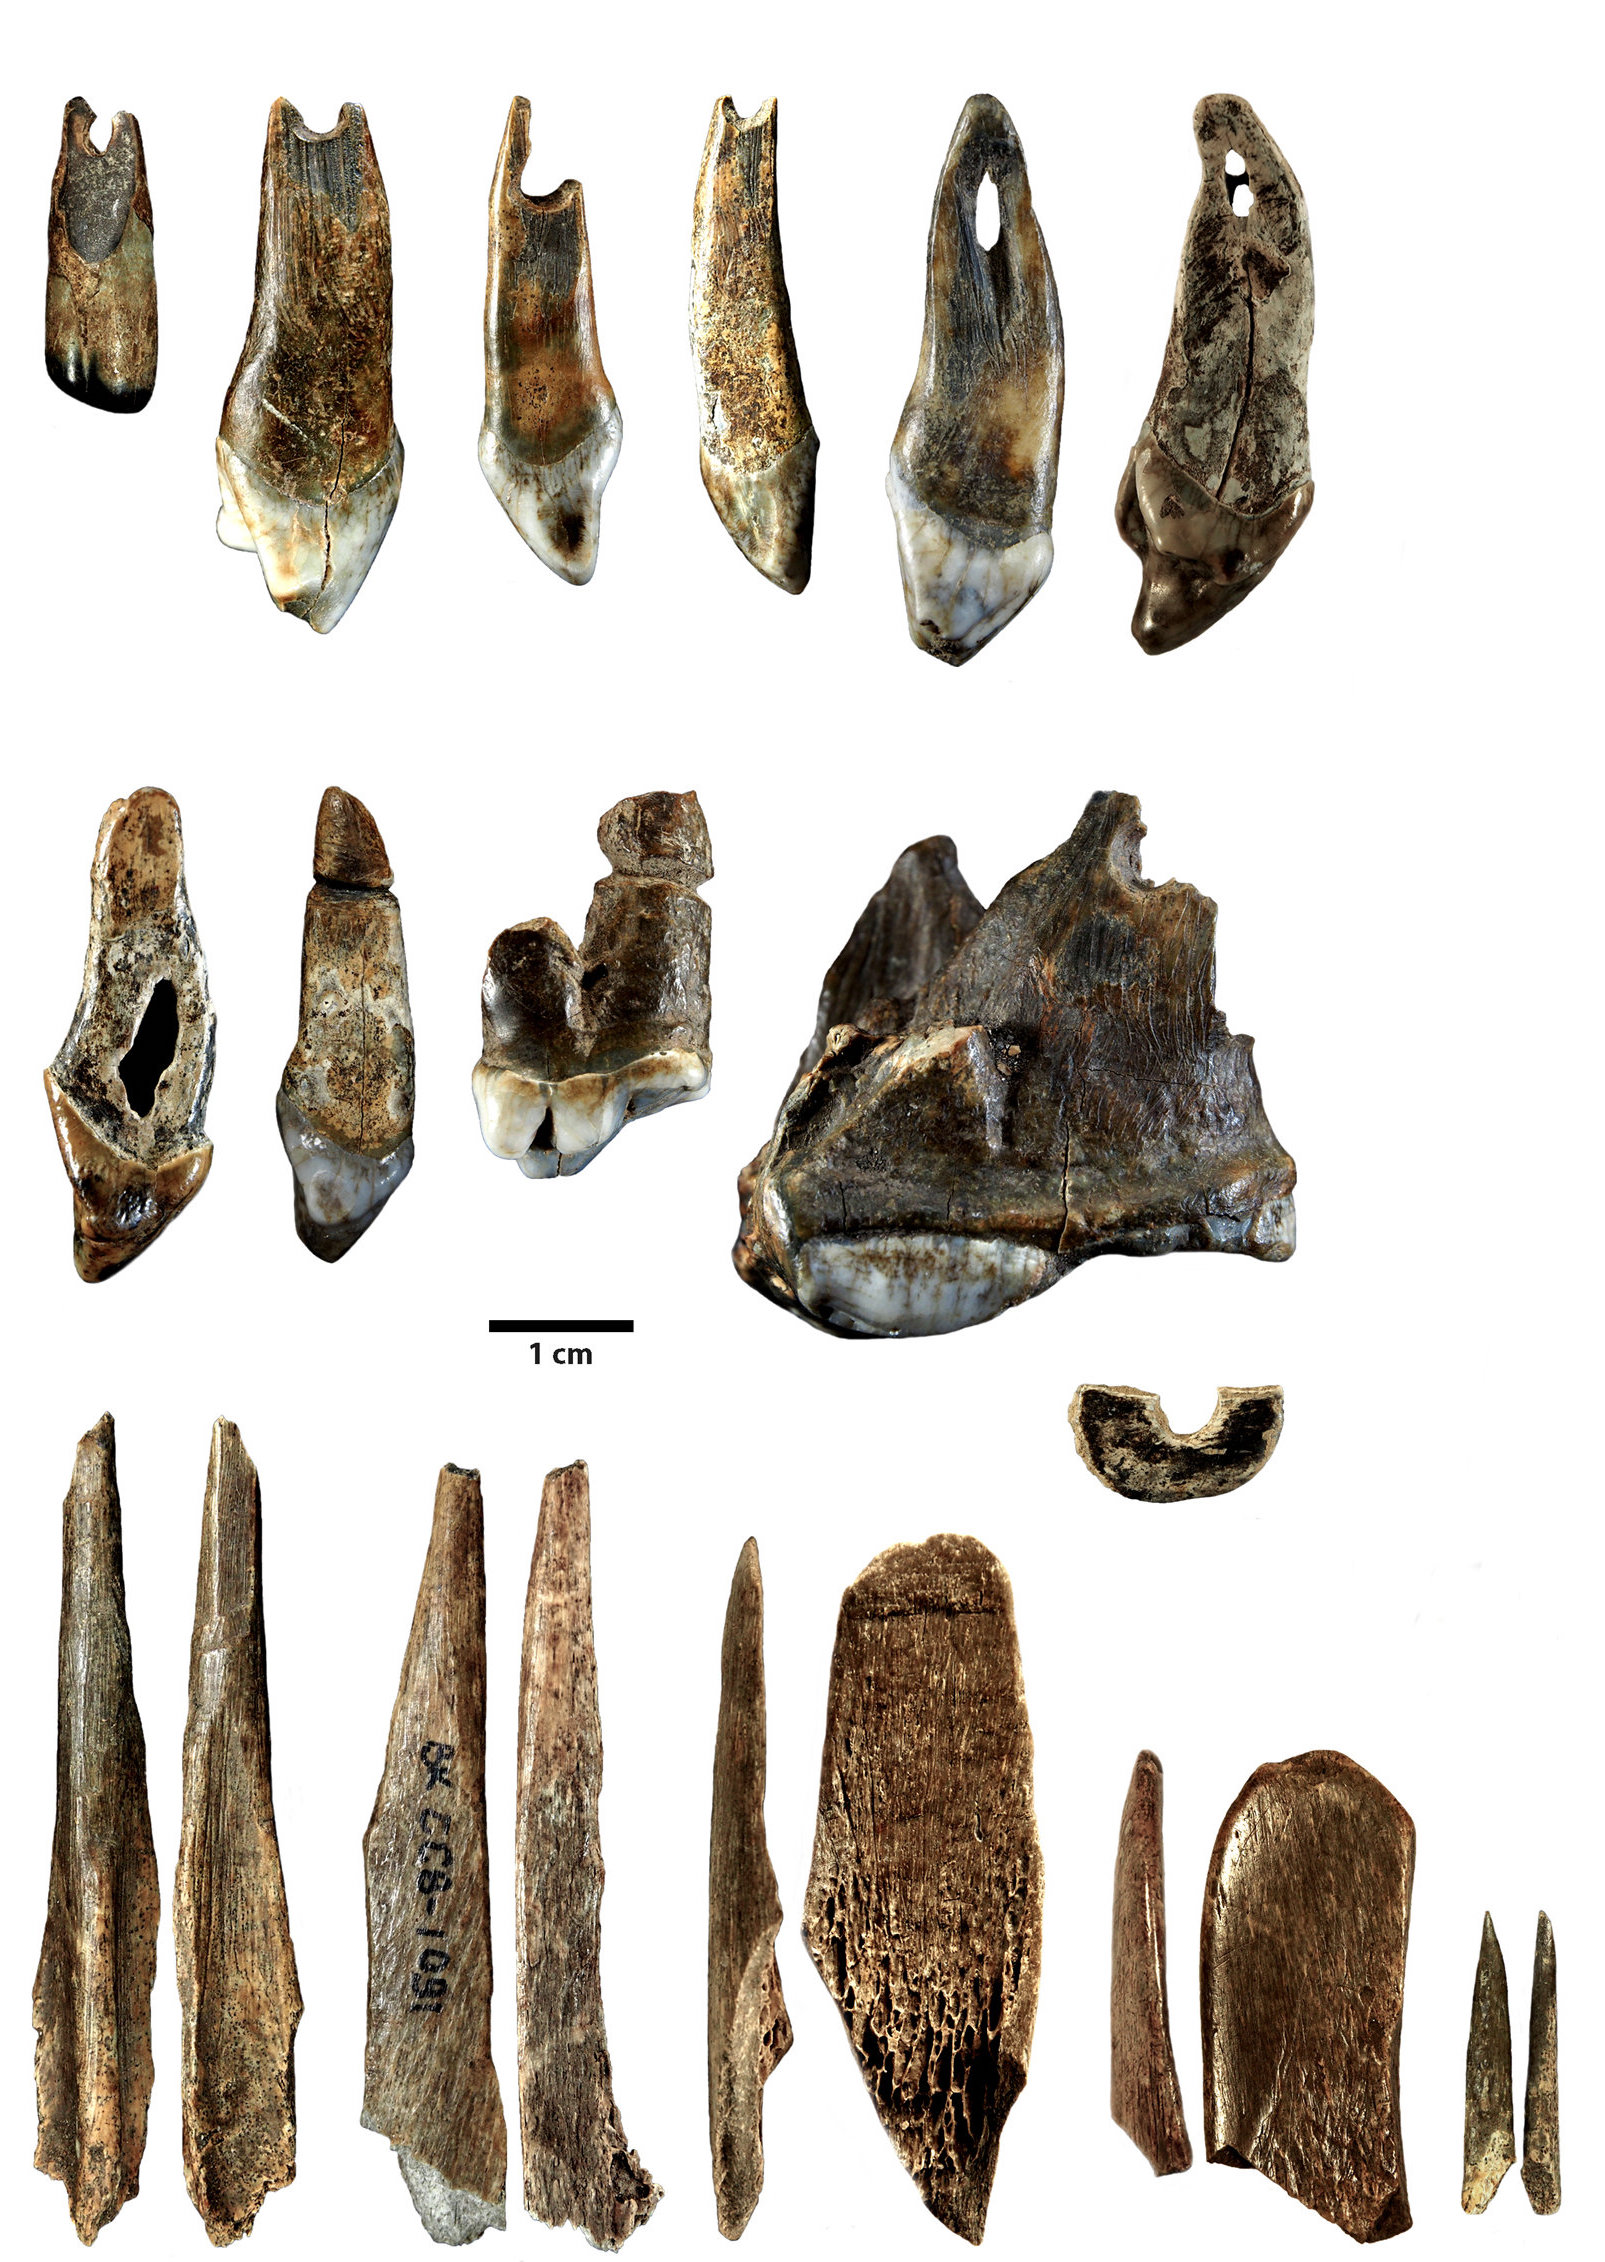 Three rows of bones and stone tools on a white background. In the middle is a measurement showing 1 centimeter length.